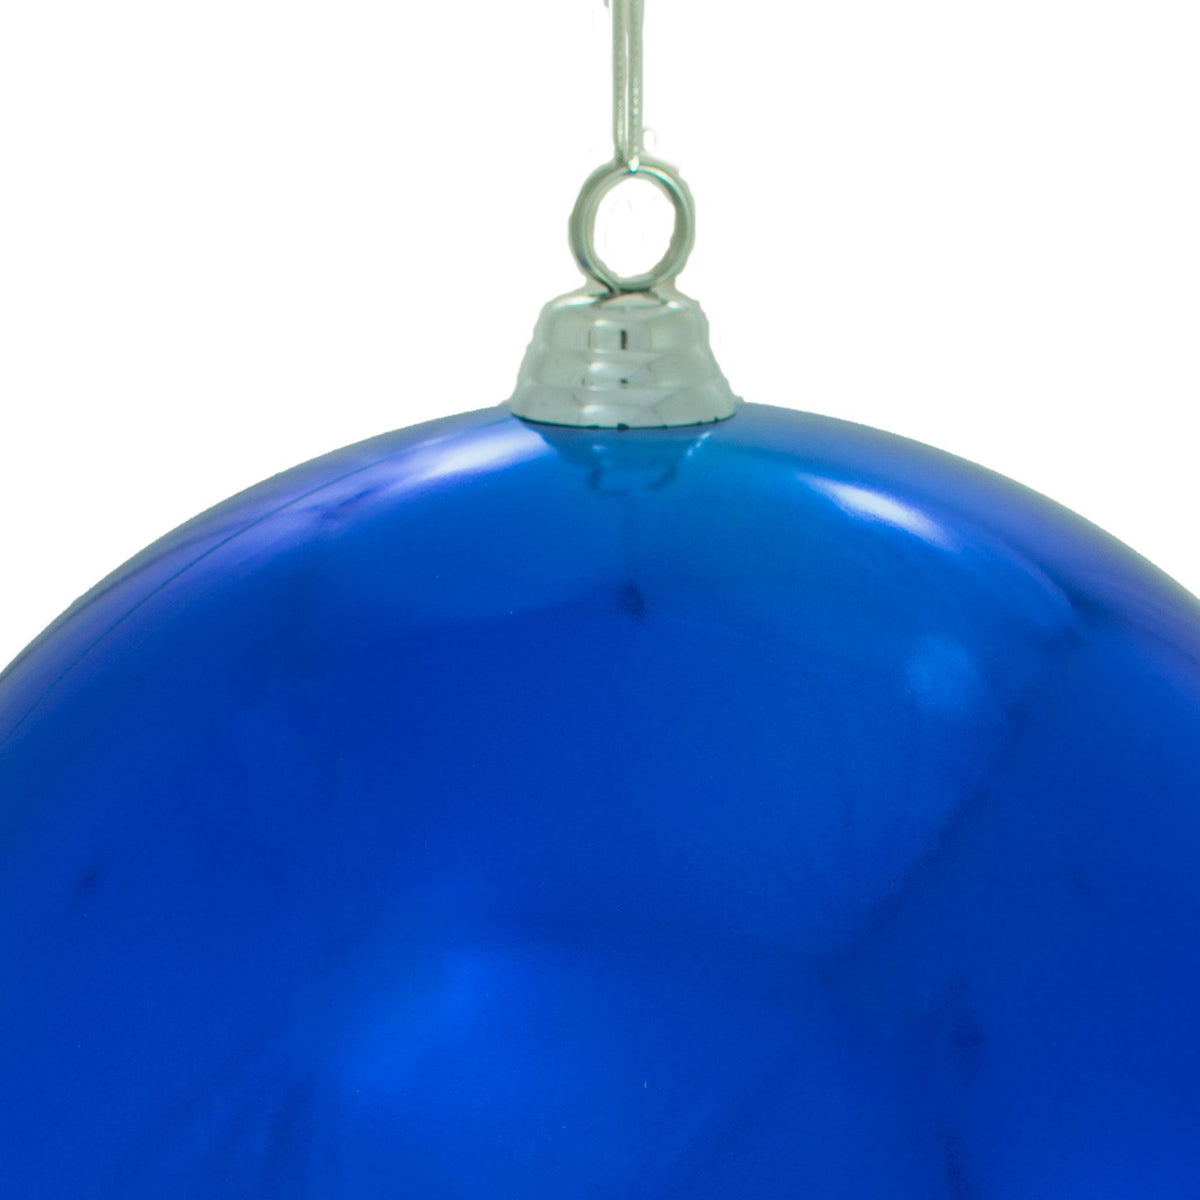 Top of the ball ornament with a silver cap and hanging string for the Shiny Blue 12in 280MM Diameter size